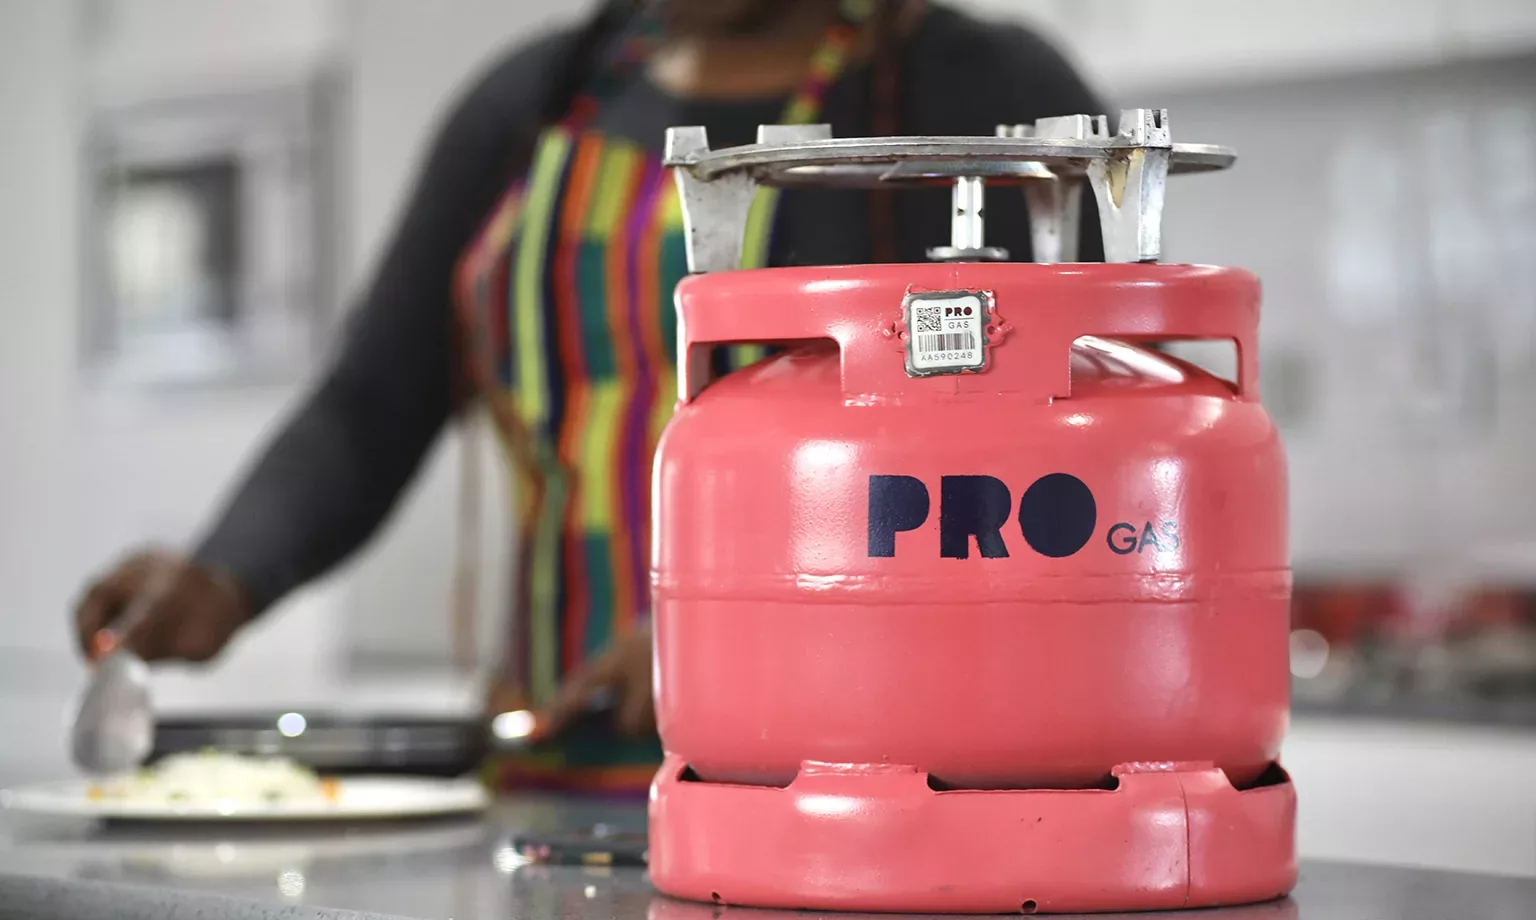 The Kenyan Government plans to distribute 4.4 million gas cylinders to low-income households across the country over the next five years. The Liquefied Petroleum Gas (LPG) subsidy programme is aimed at transitioning poor households from traditional fuels such as charcoal and other wood fuels to clean cooking alternatives.